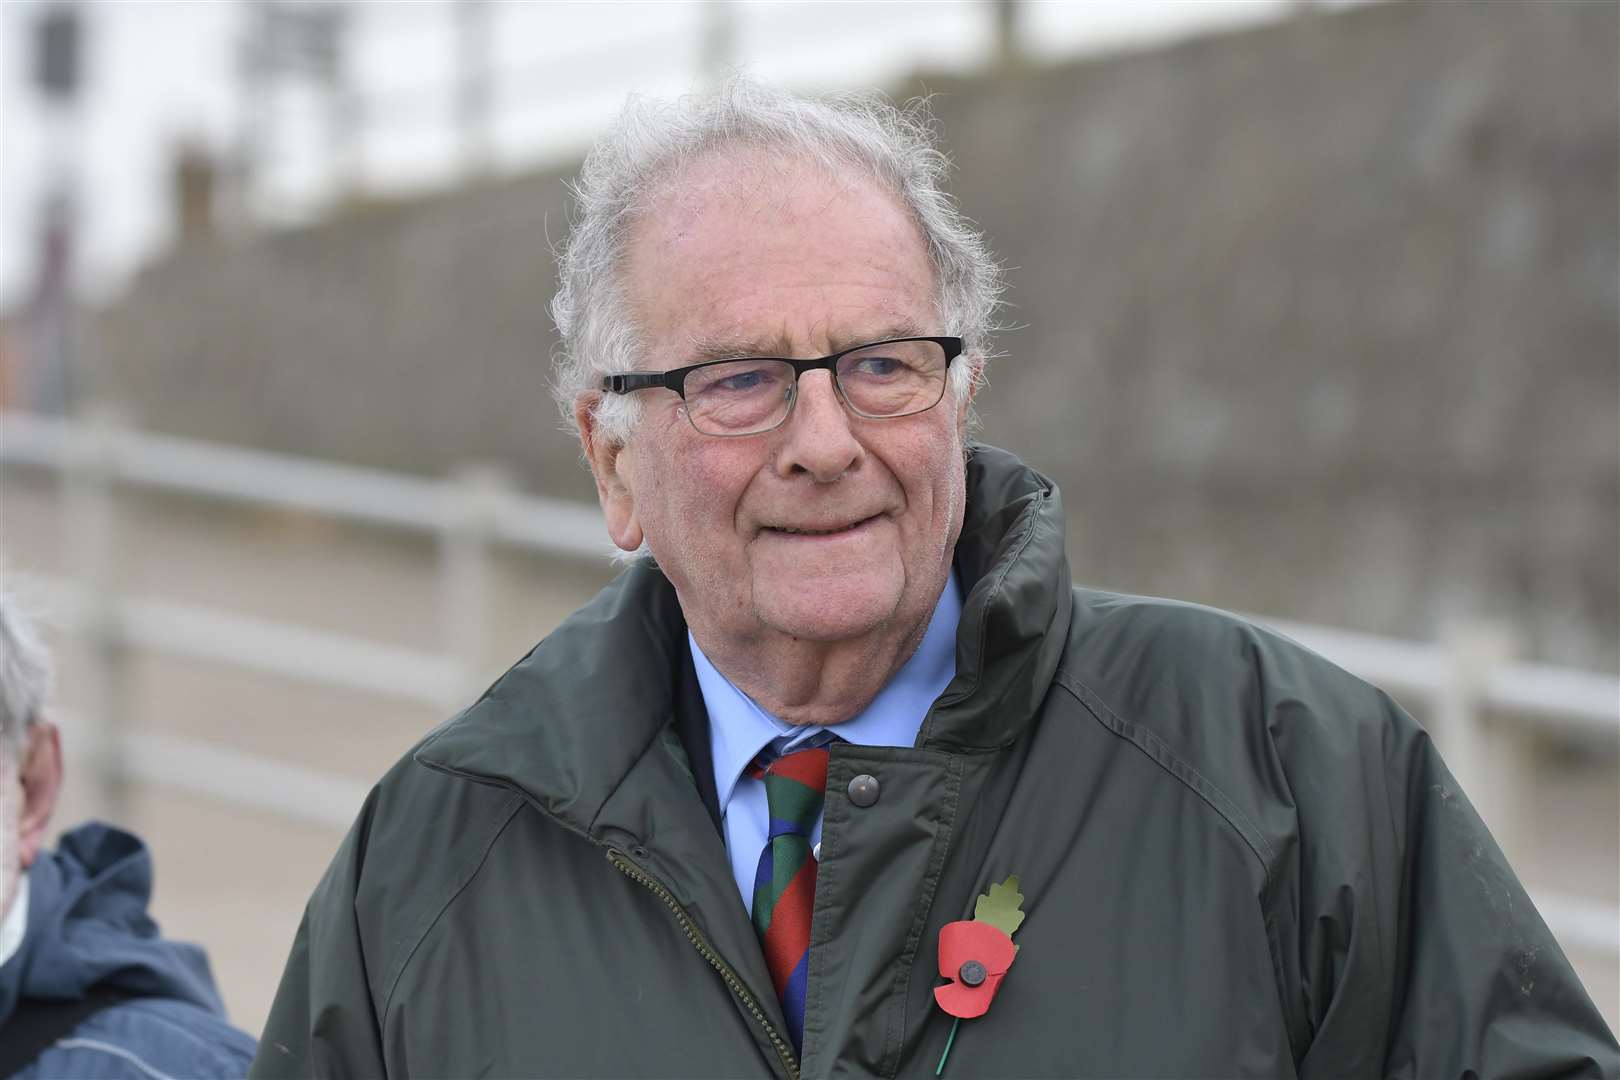 Thanet North's MP Sir Roger Gale